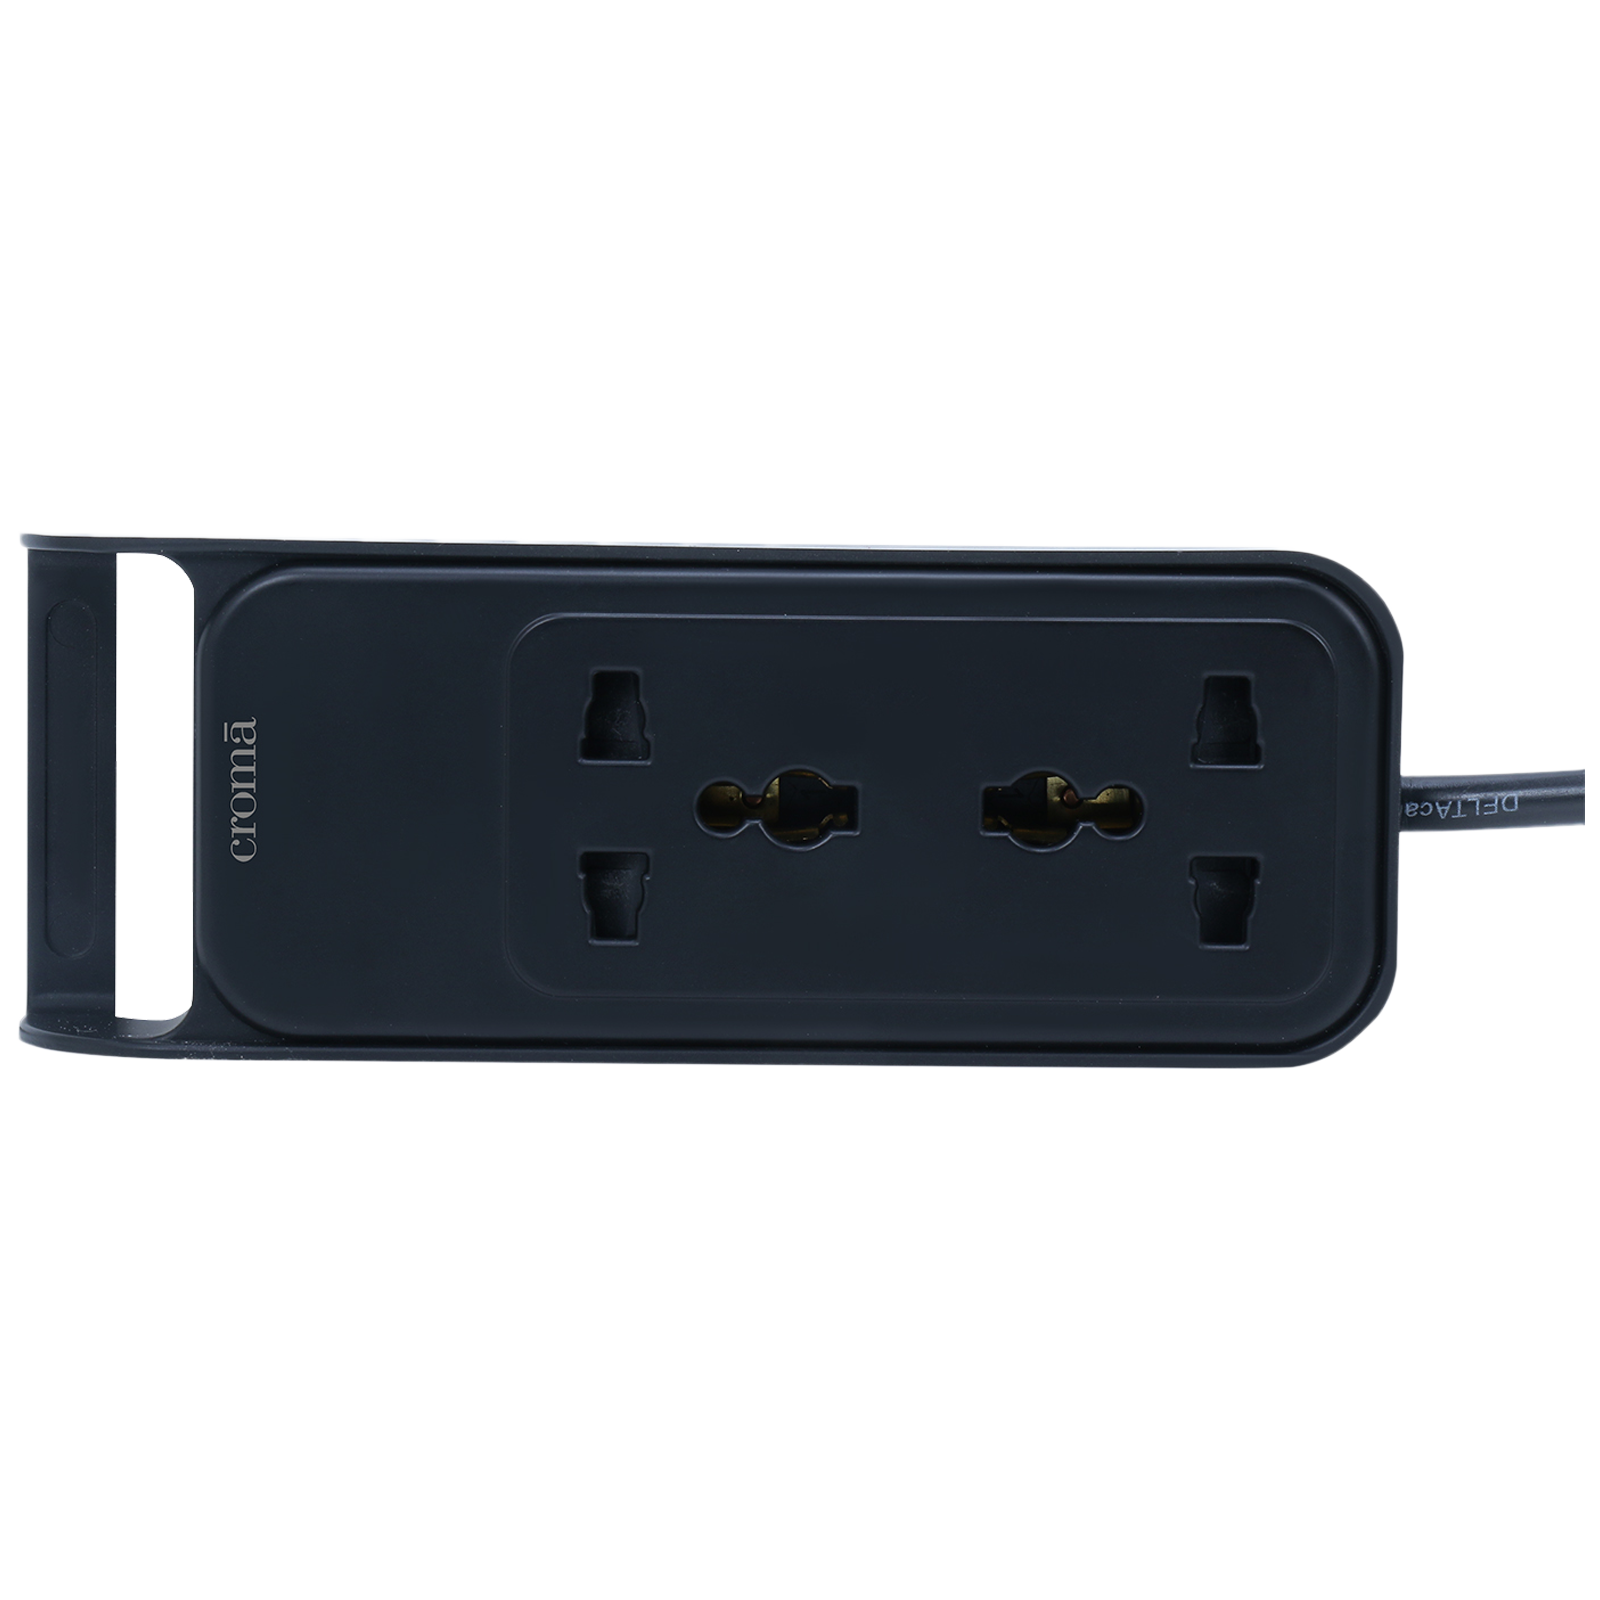 Croma 6 Amps 2 Sockets Surge Protector (0.8 Meters, Safety Shutters in Socket, CRSP2WMSPA264301, Black)